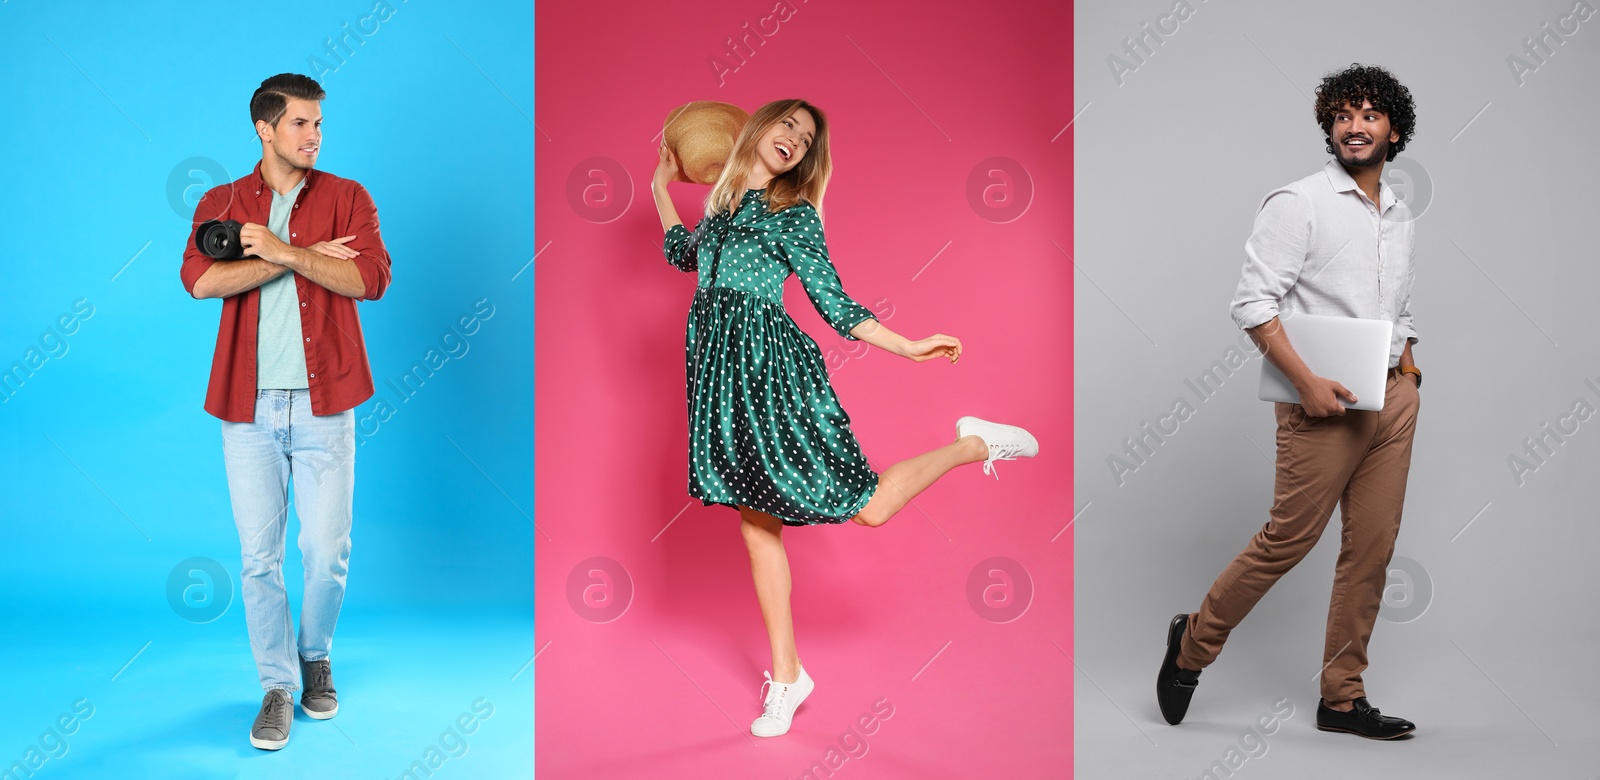 Image of Different people on various color backgrounds, collage